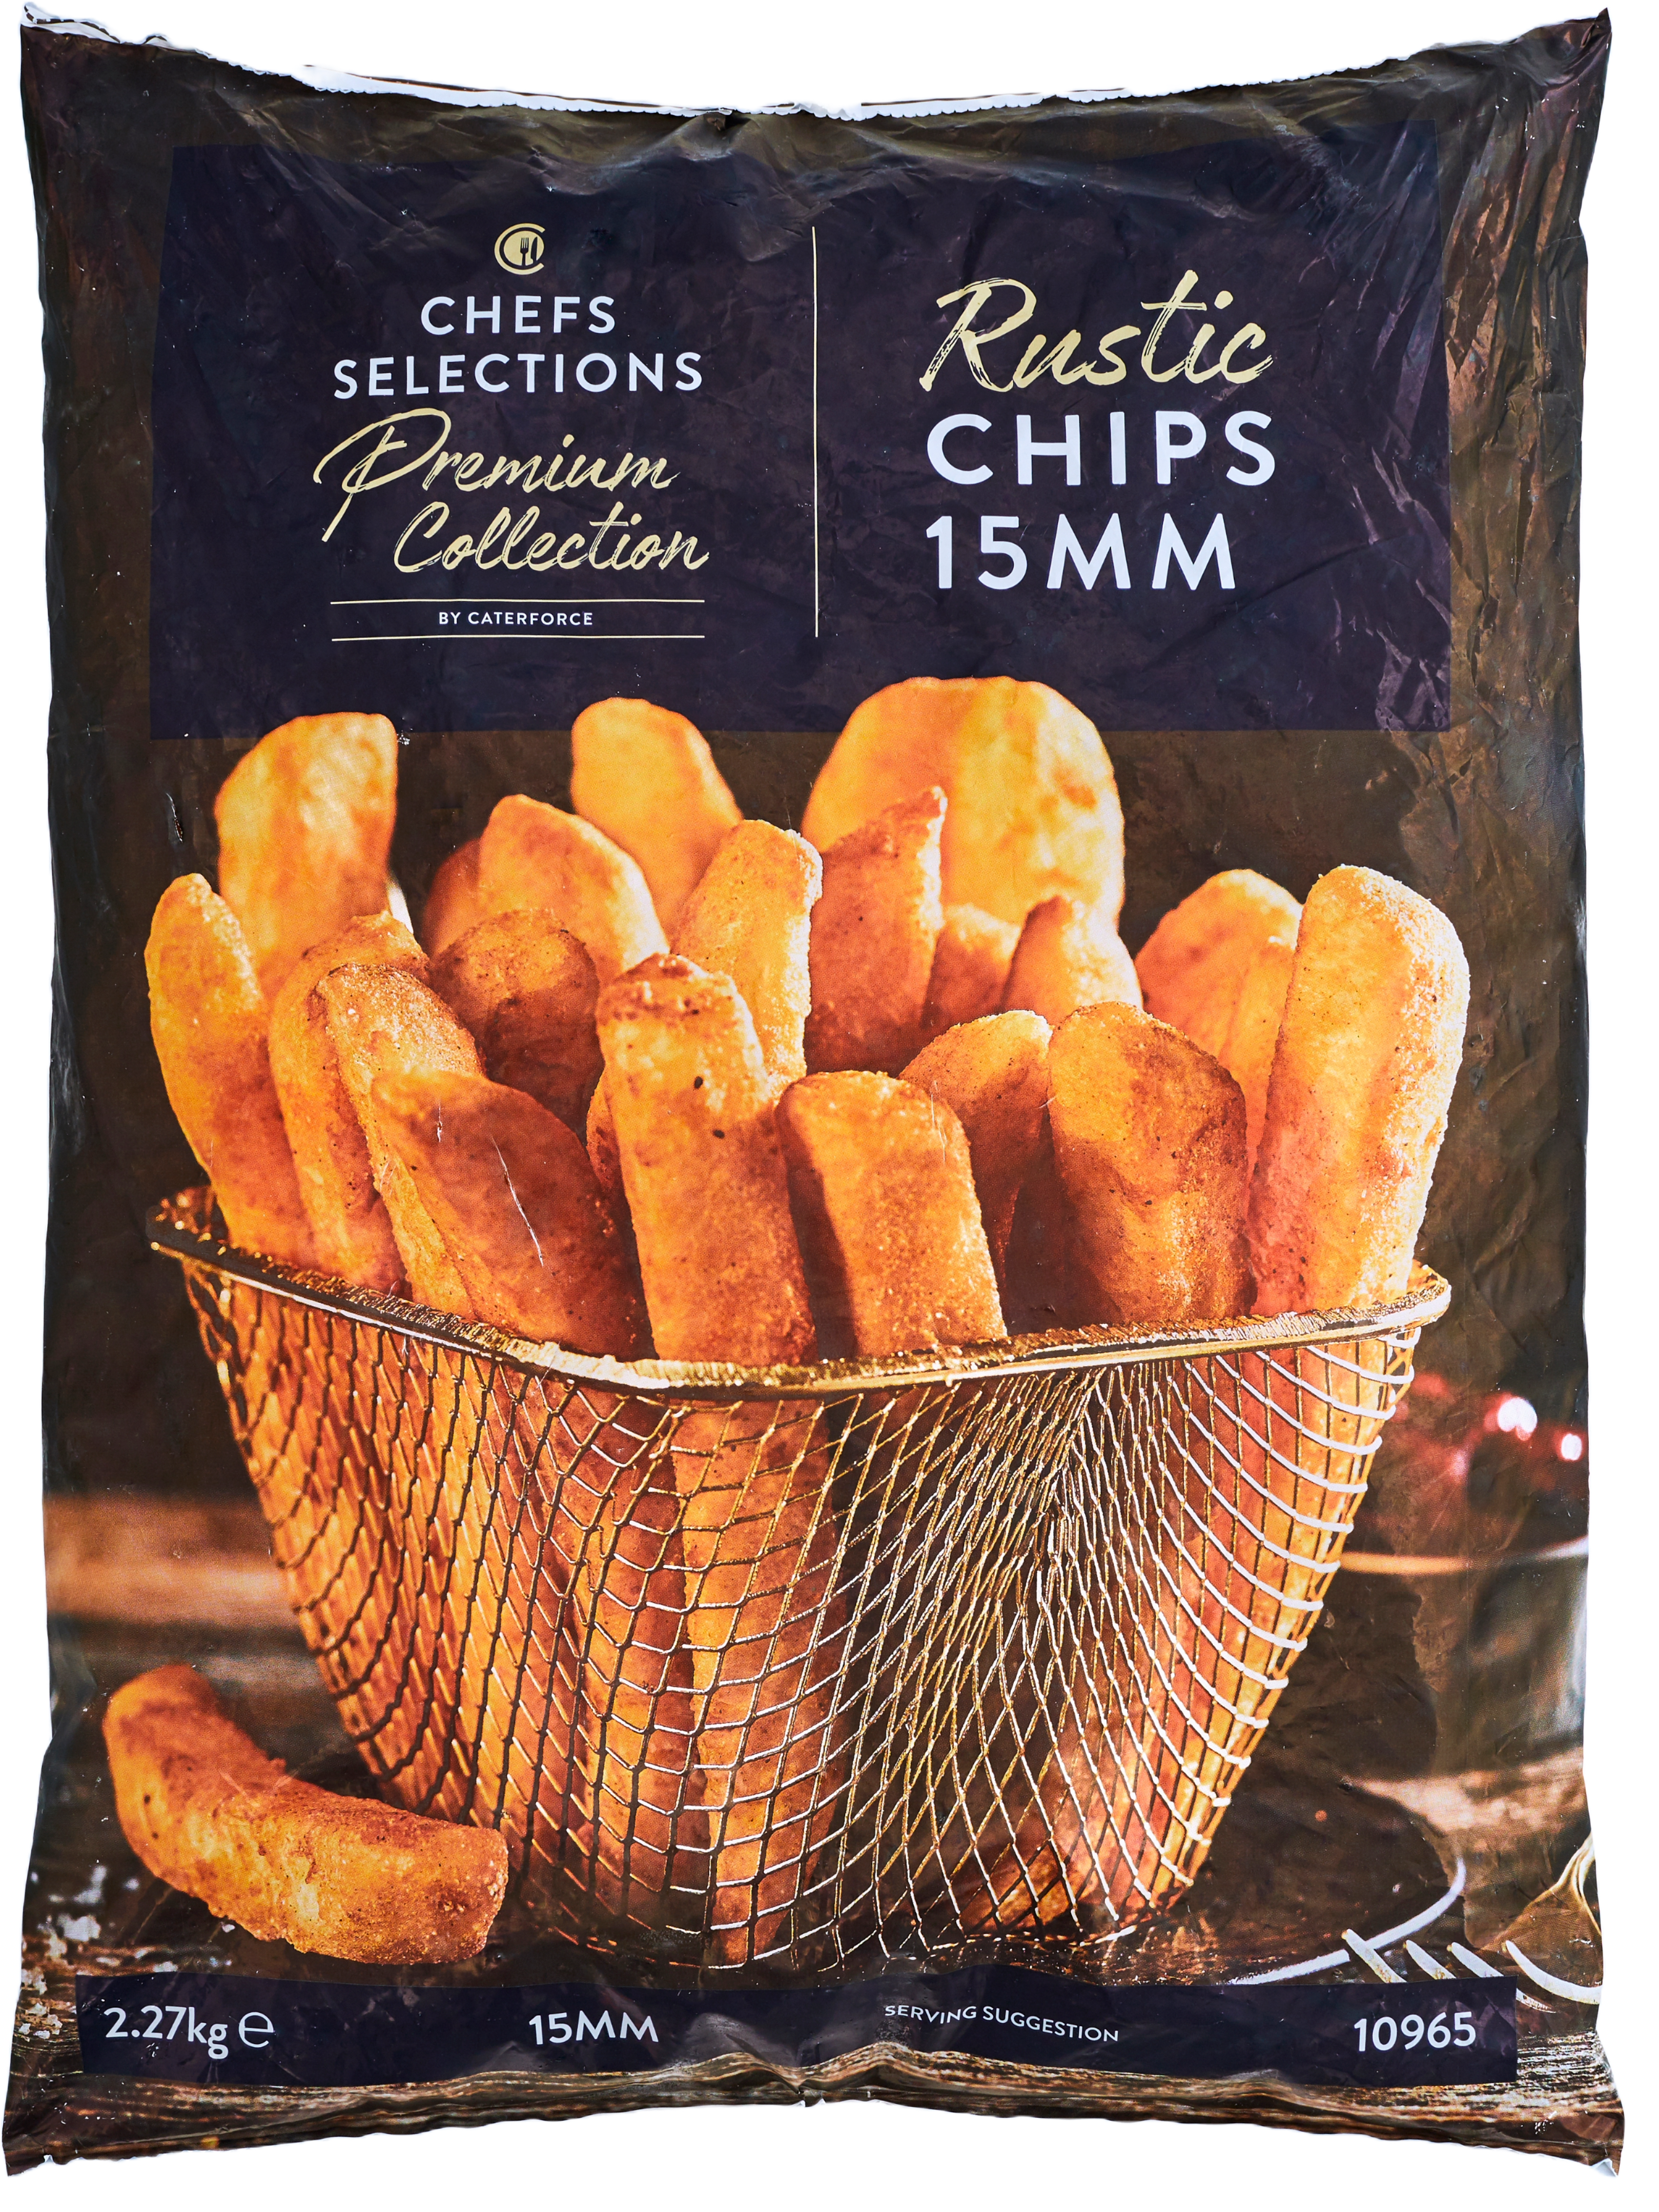 Chefs’ Selections Premium Rustic Chips 15mm (4 x 2.27kg)